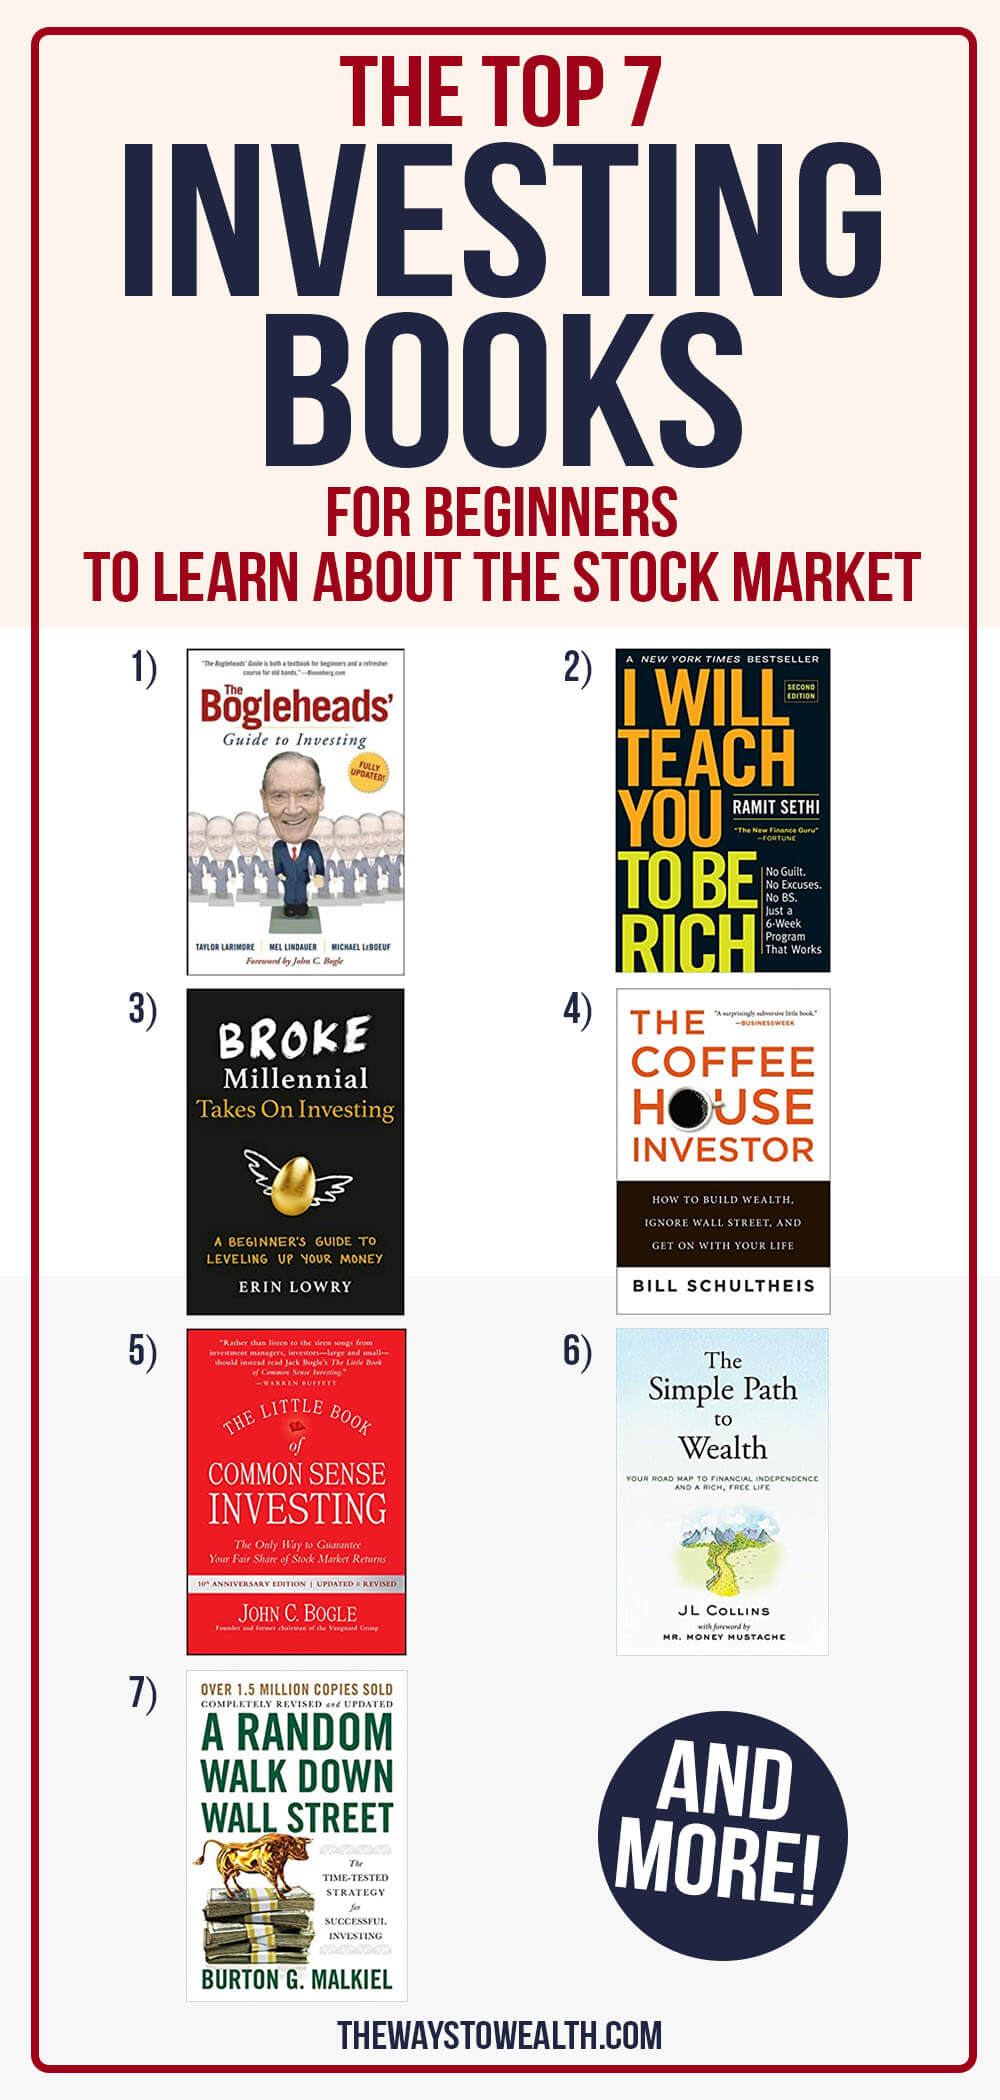 the-best-investing-books-for-beginners-to-learn-the-stock-market-2020